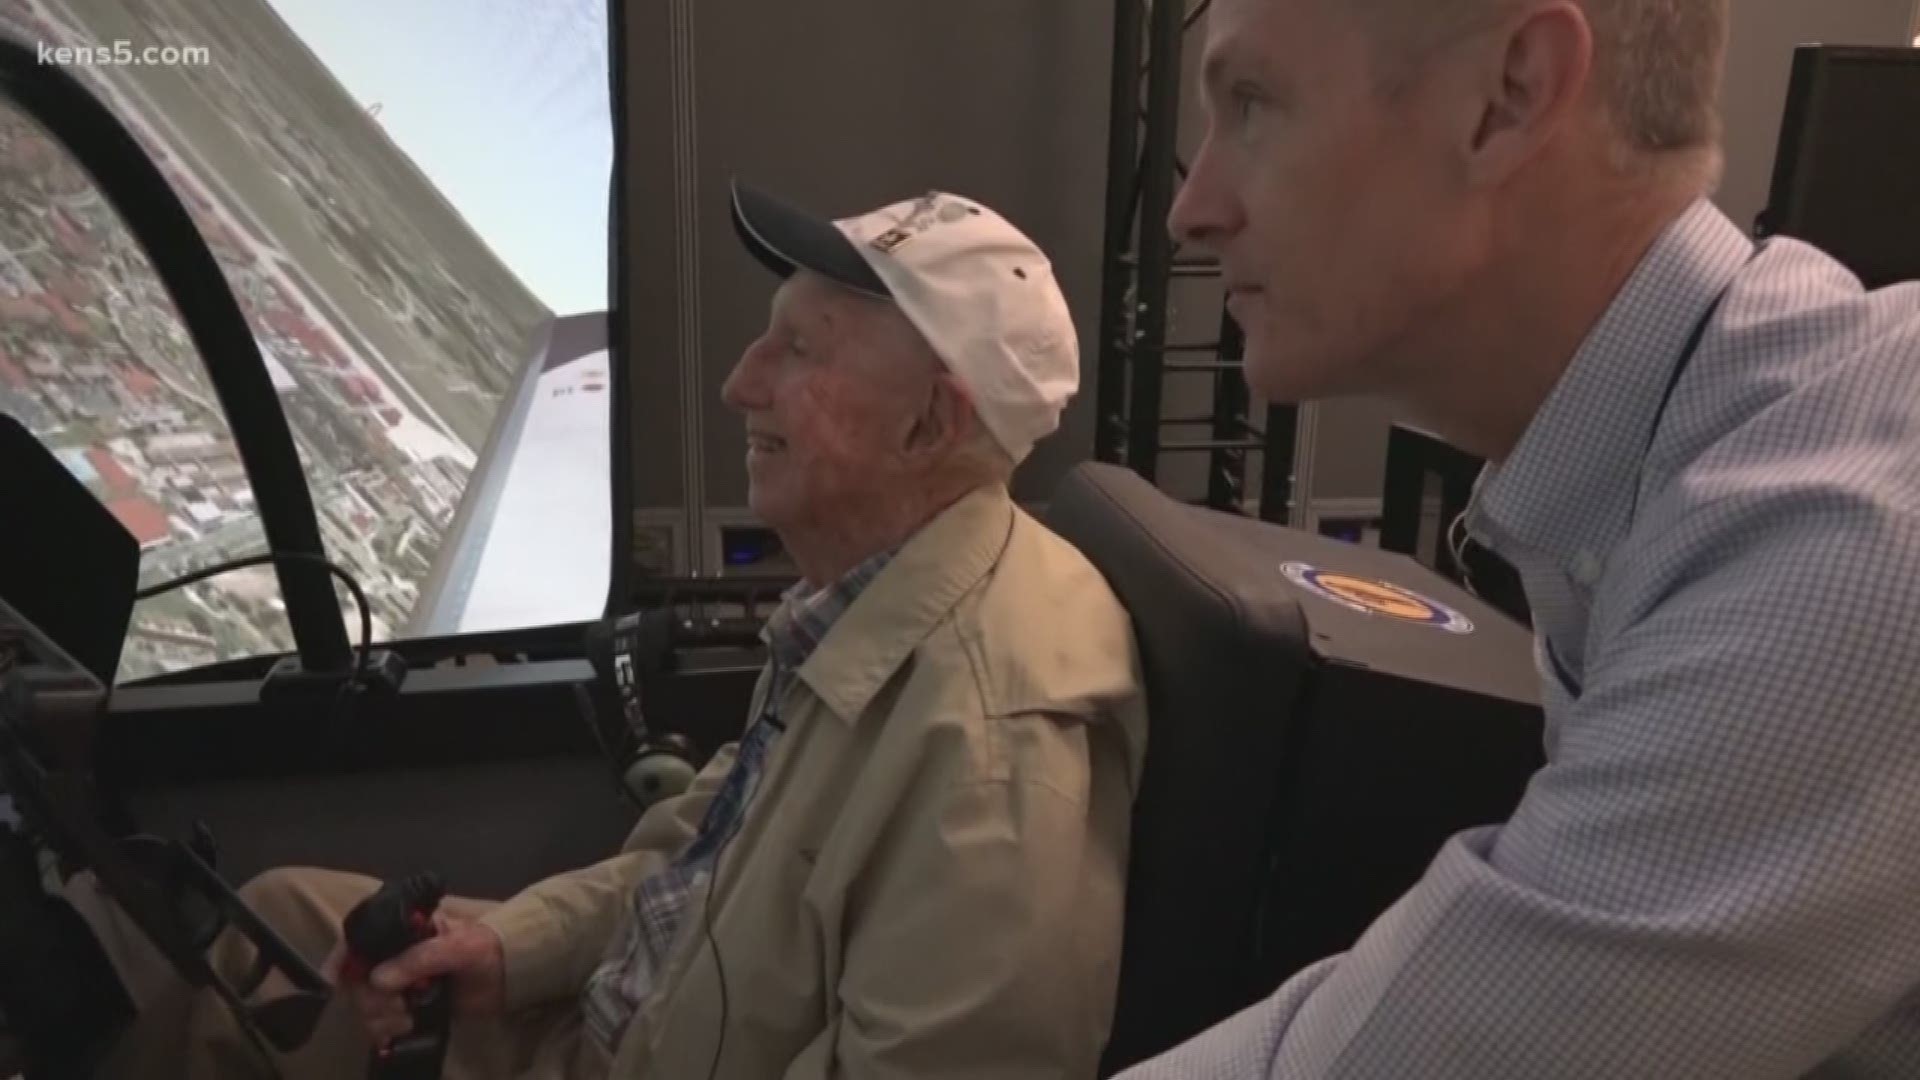 The past meets the present at Joint Base San Antonio's Randolph Air Force base. World War II fighter pilots meet the young aviators and take to the skies once again. Eyewitness News reporter Sharon Ko explains.